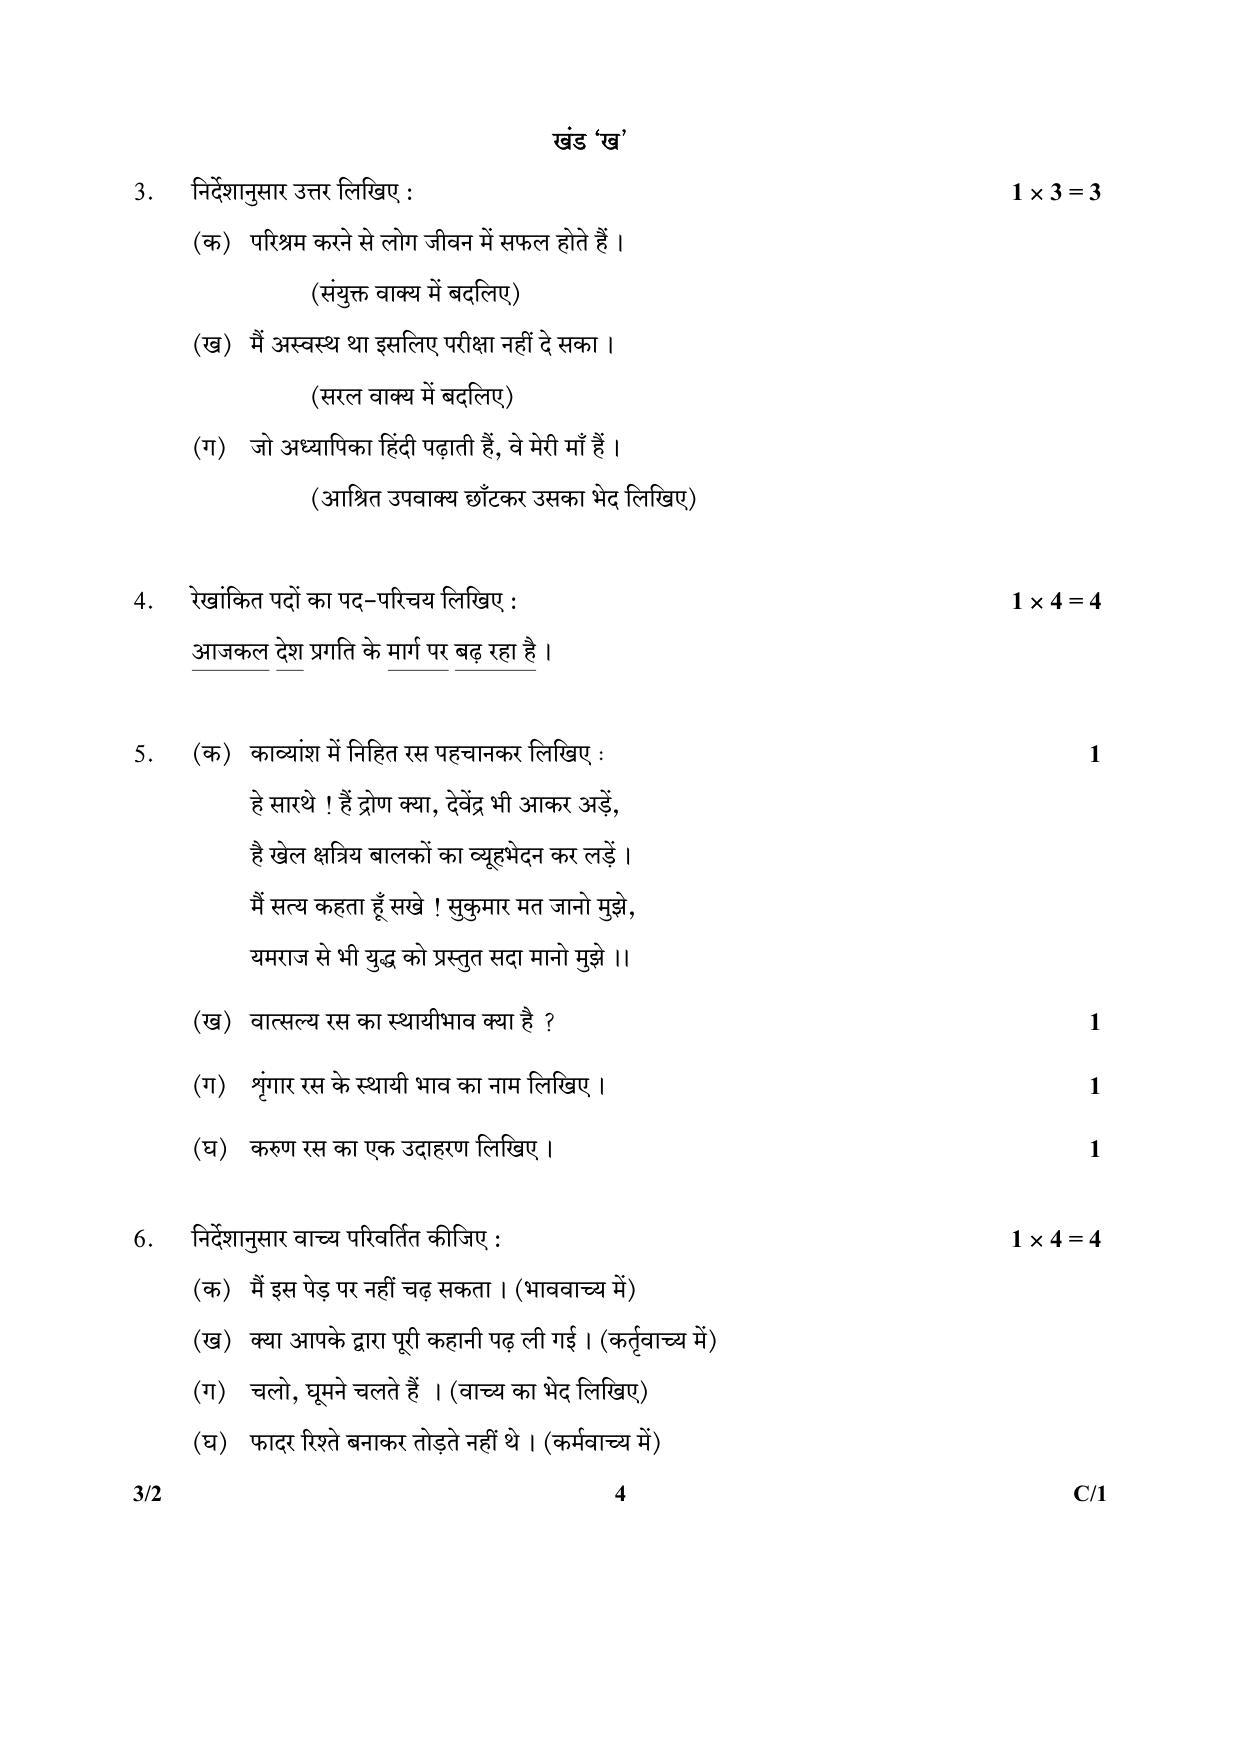 CBSE Class 10 3-2_Hindi 2018 Compartment Question Paper - Page 4